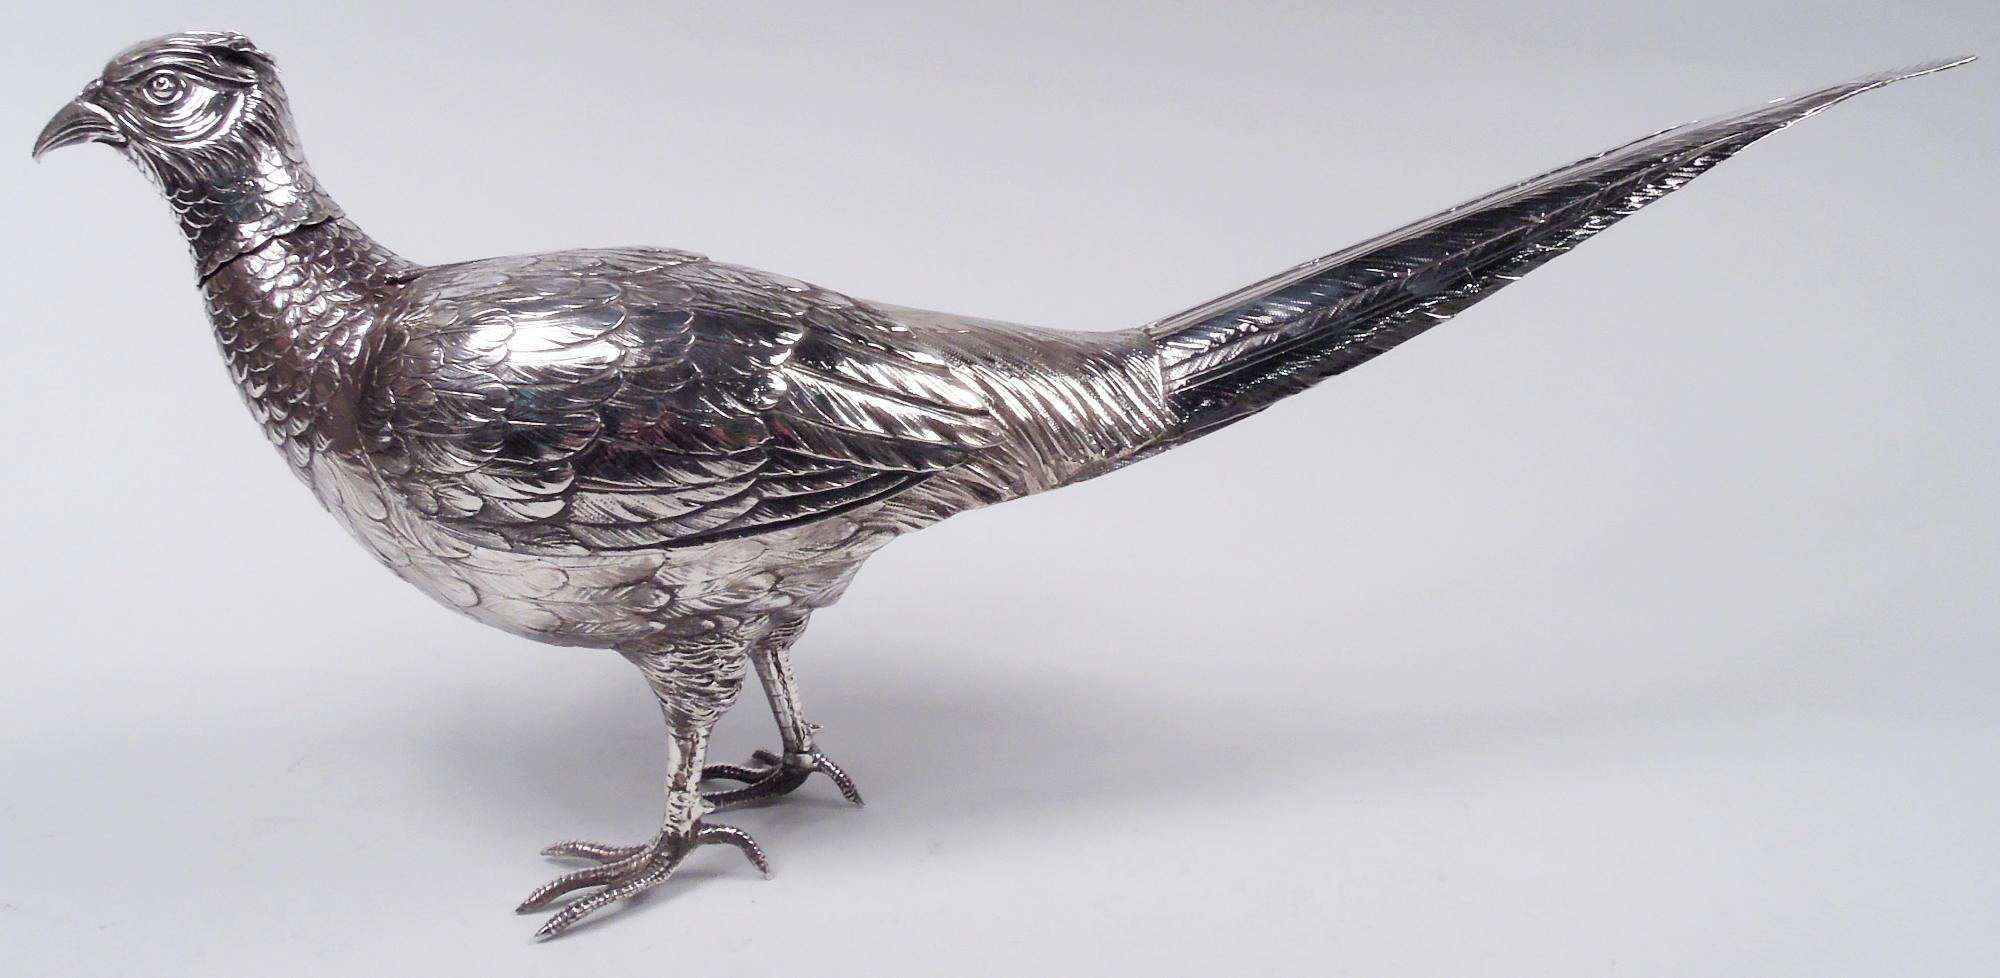 Pair of German 800 silver pheasants, ca 1920. A rooster and hen, each with hinged wings, long overlapping tails, closed beak, and wary stare. An on-guard couple standing on scaly talons, ready to take flight if the party talk turns dull. Heads